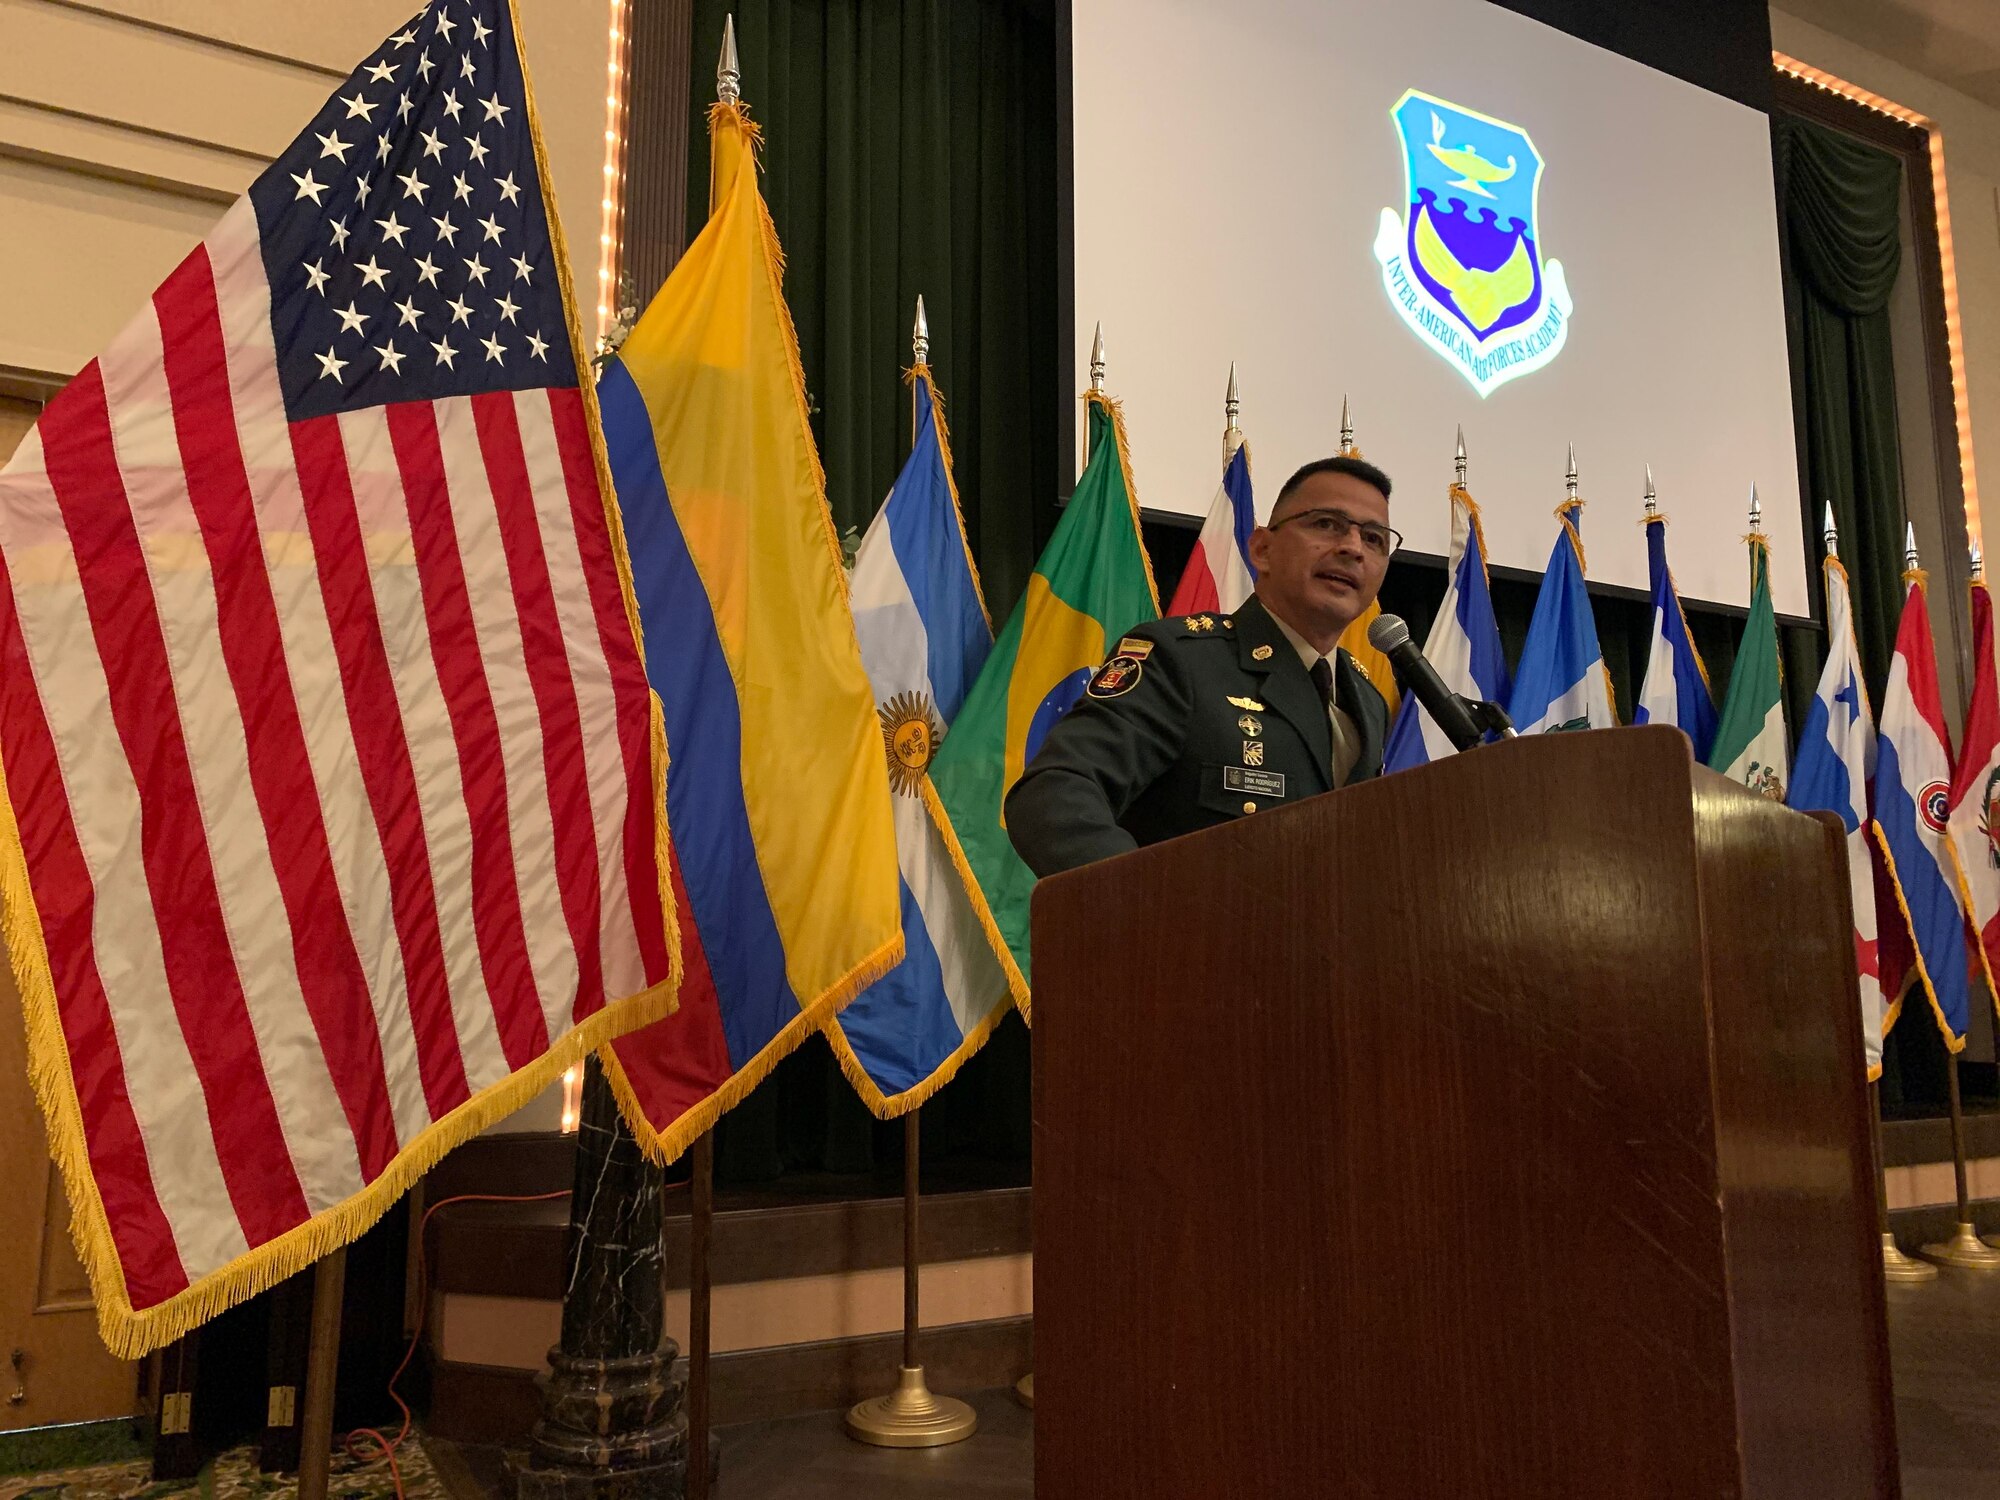 JOINT BASE SAN ANTONIO-LACKLAND, Texas --Approximately 150 members of the Inter-American Air Forces Academy and distinguished guests gathered at a graduation for nearly 60 students from partner nations and the U.S. Air Force here April 15, 2021.